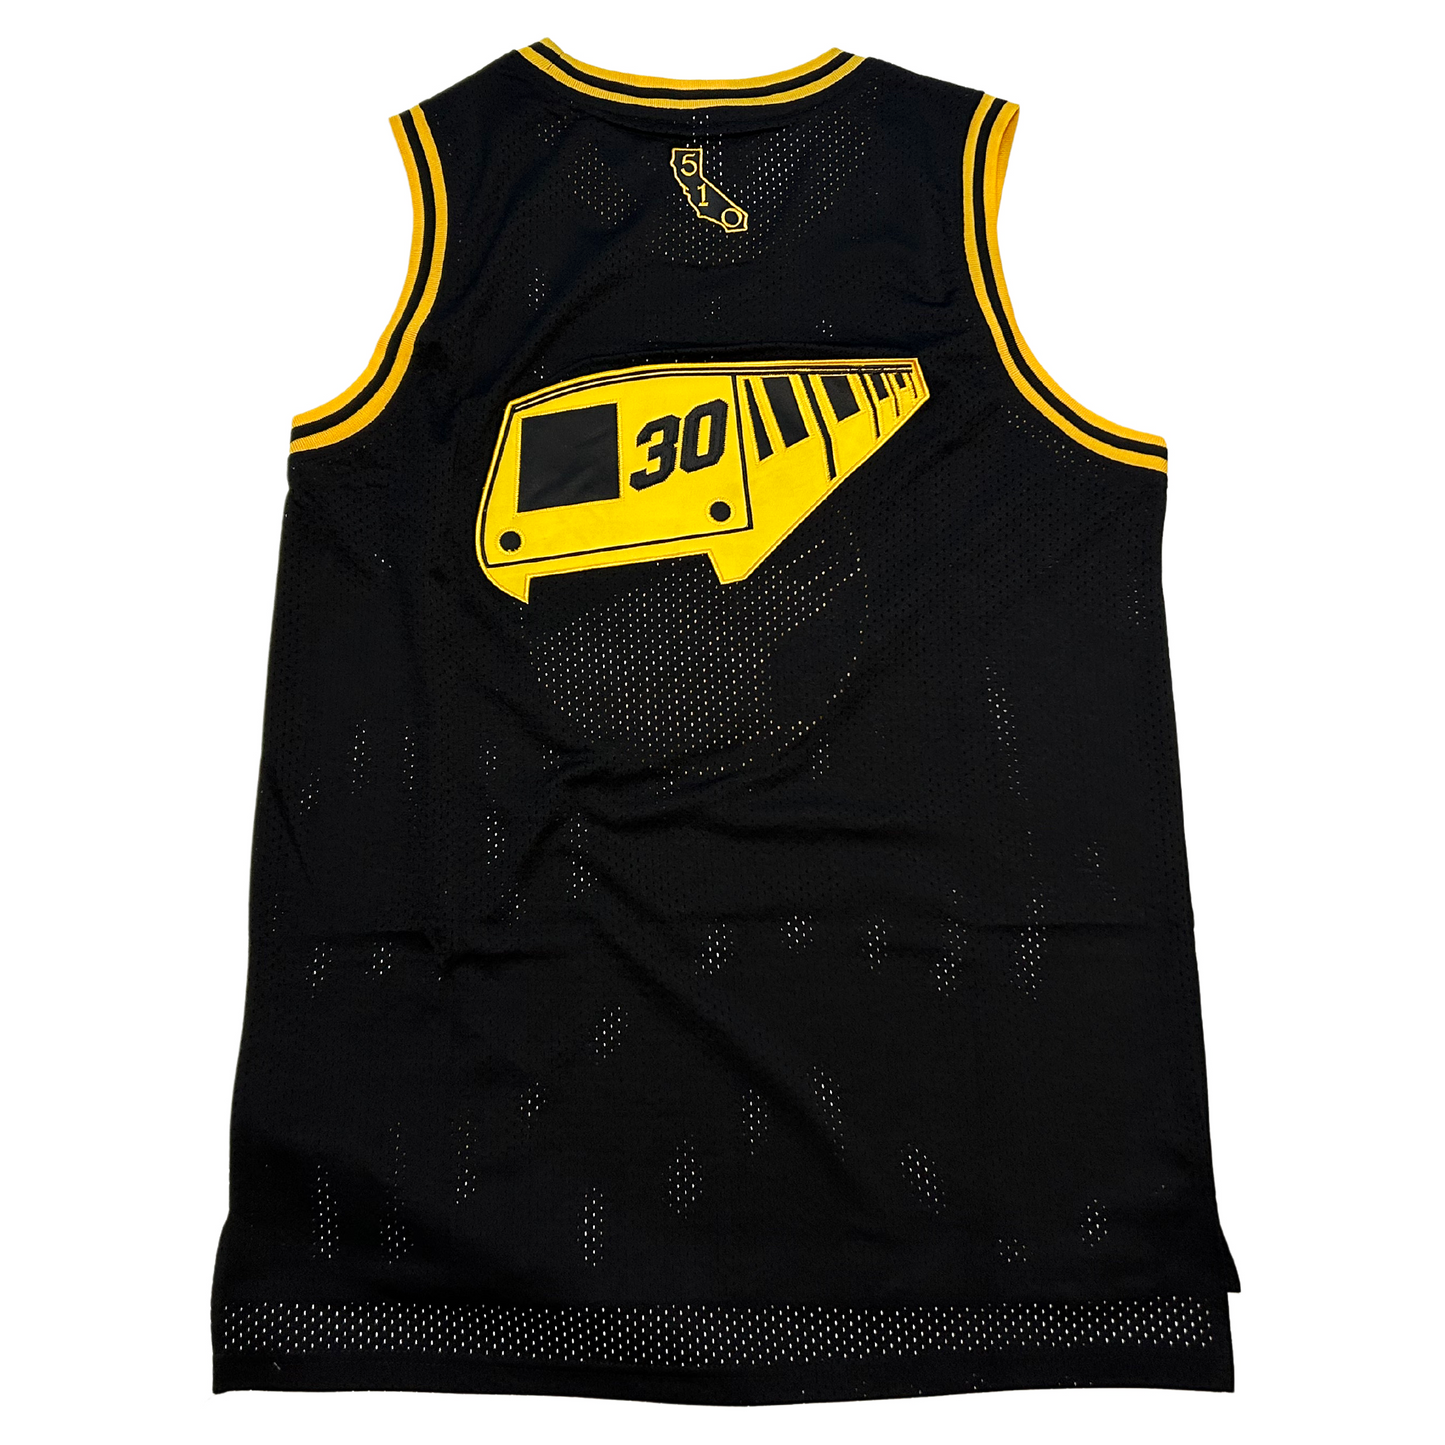 The Town Jersey